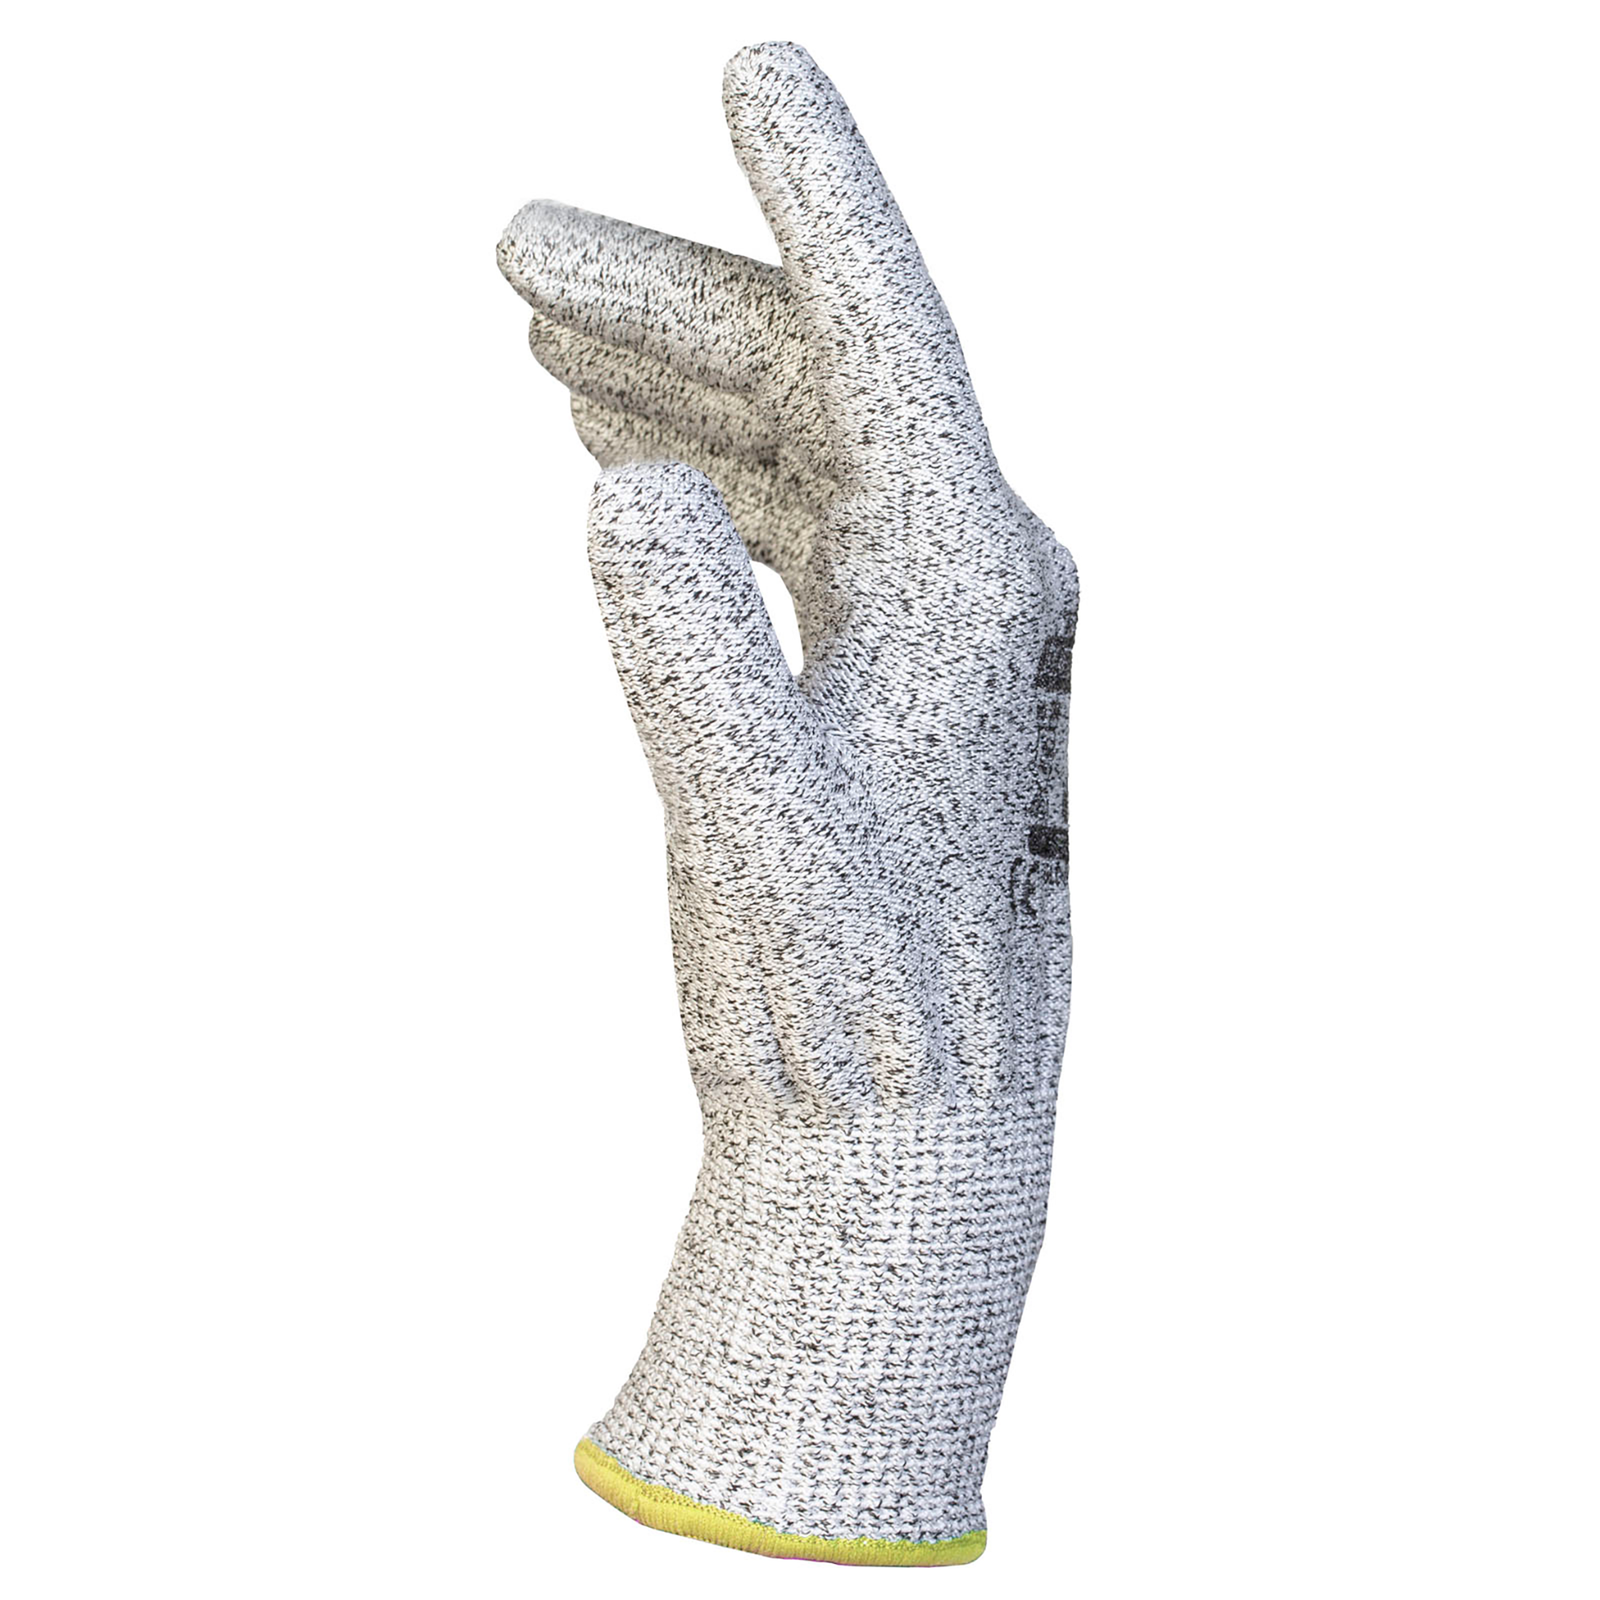 Cut resistant multipurpose safety work gloves cut protection in a pack of 12